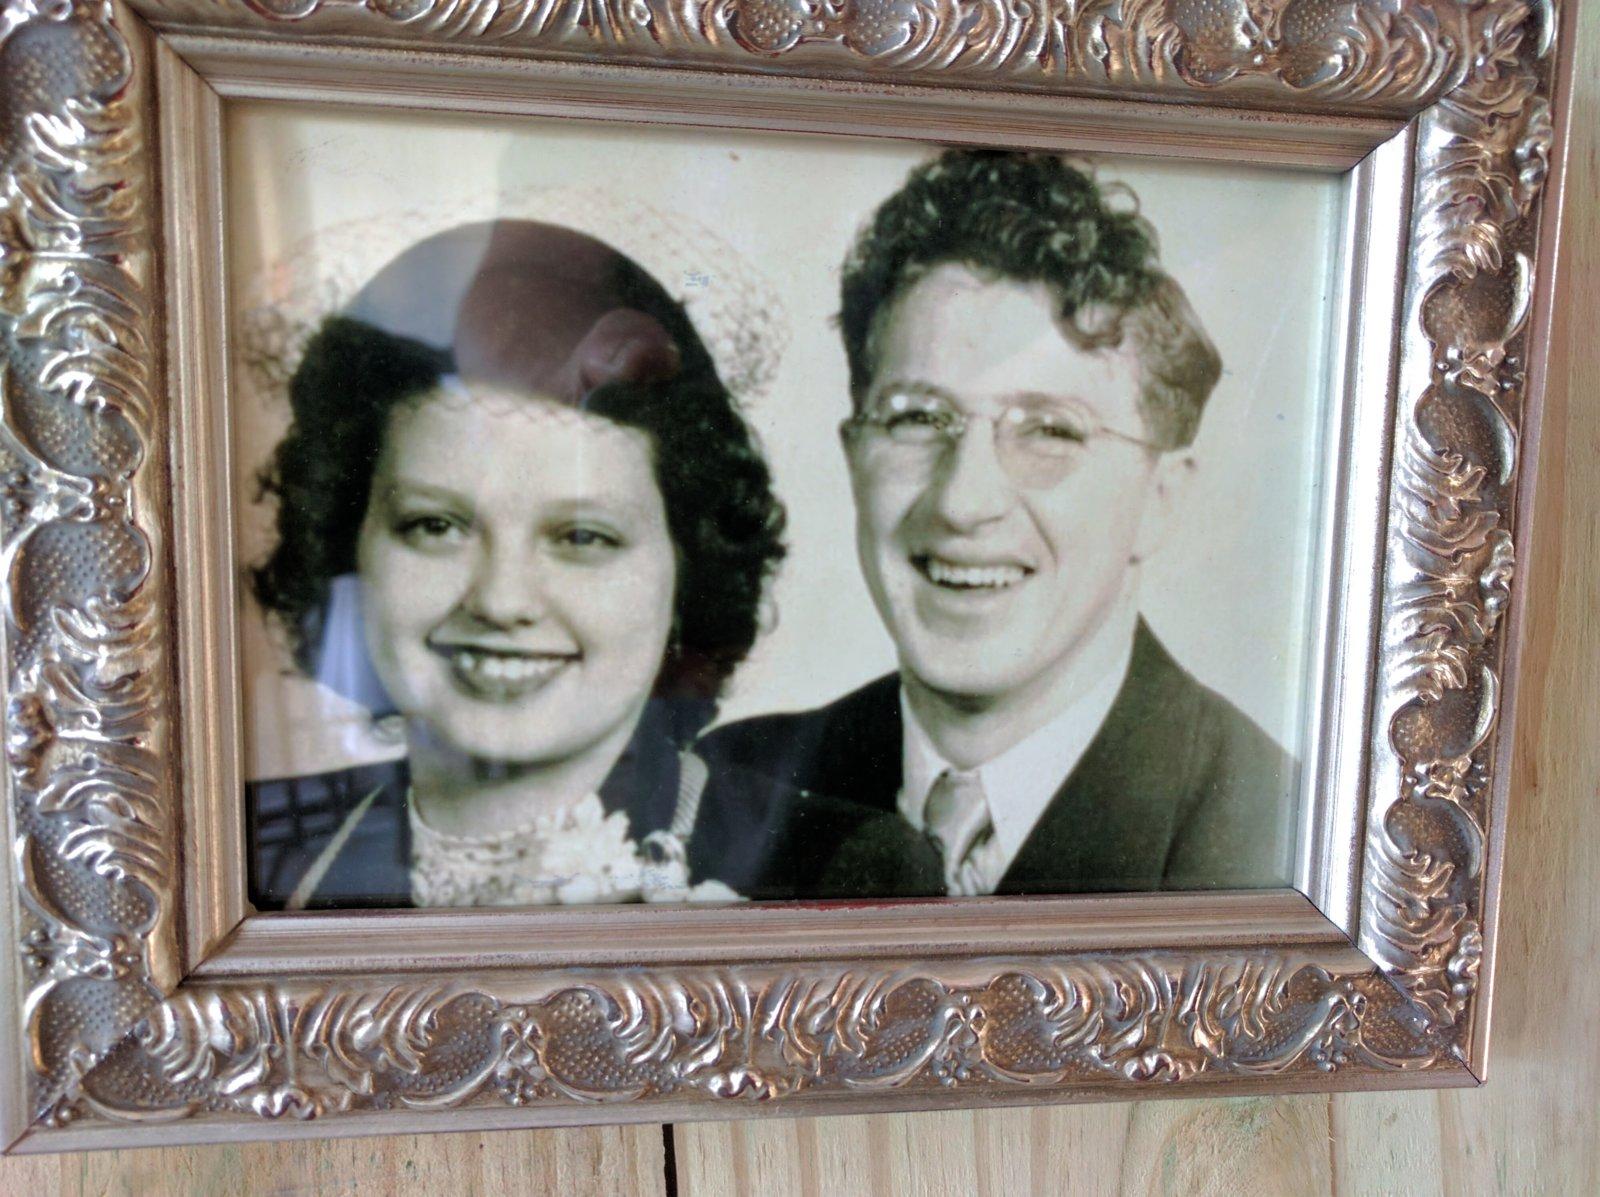 My brothers' first mom and our dad. Love Dad's curly hair.